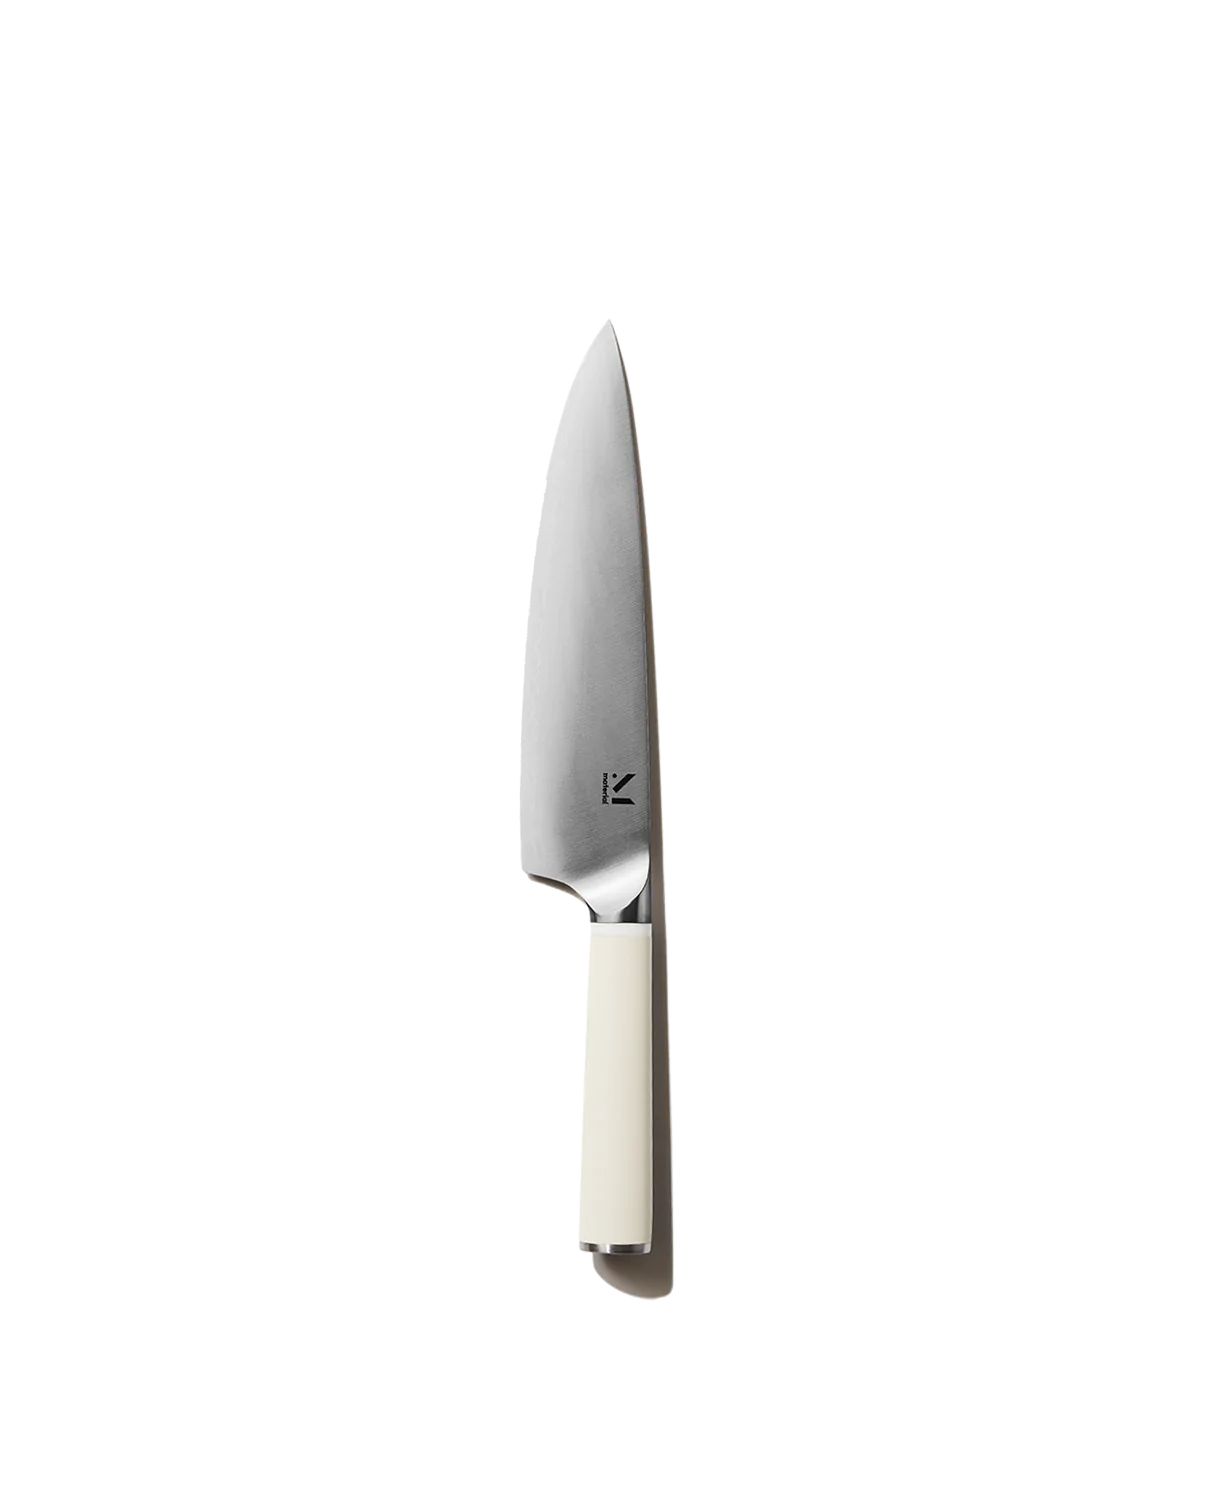 The 8" Knife: Thoughtfully Designed, Affordably Priced | Material